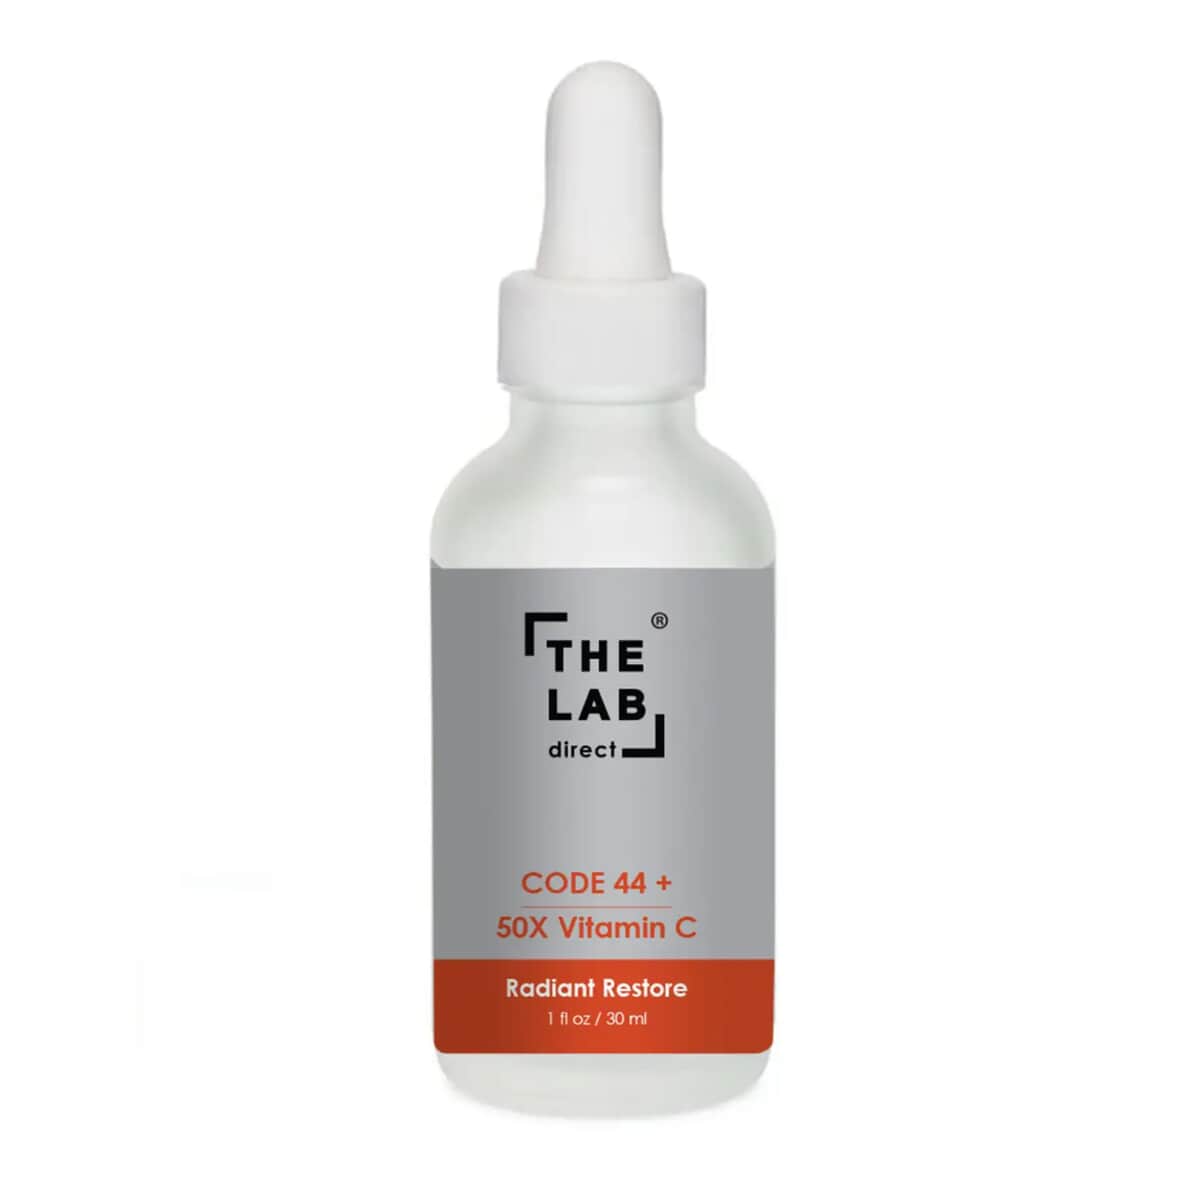 The Lab Direct Code 44+ 50x Vitamin C Radiant Restore Serum For All Skin Types, Cruelty And Paraben Free Face Serum For Firm Skin and Collagen Production 1 oz image number 0